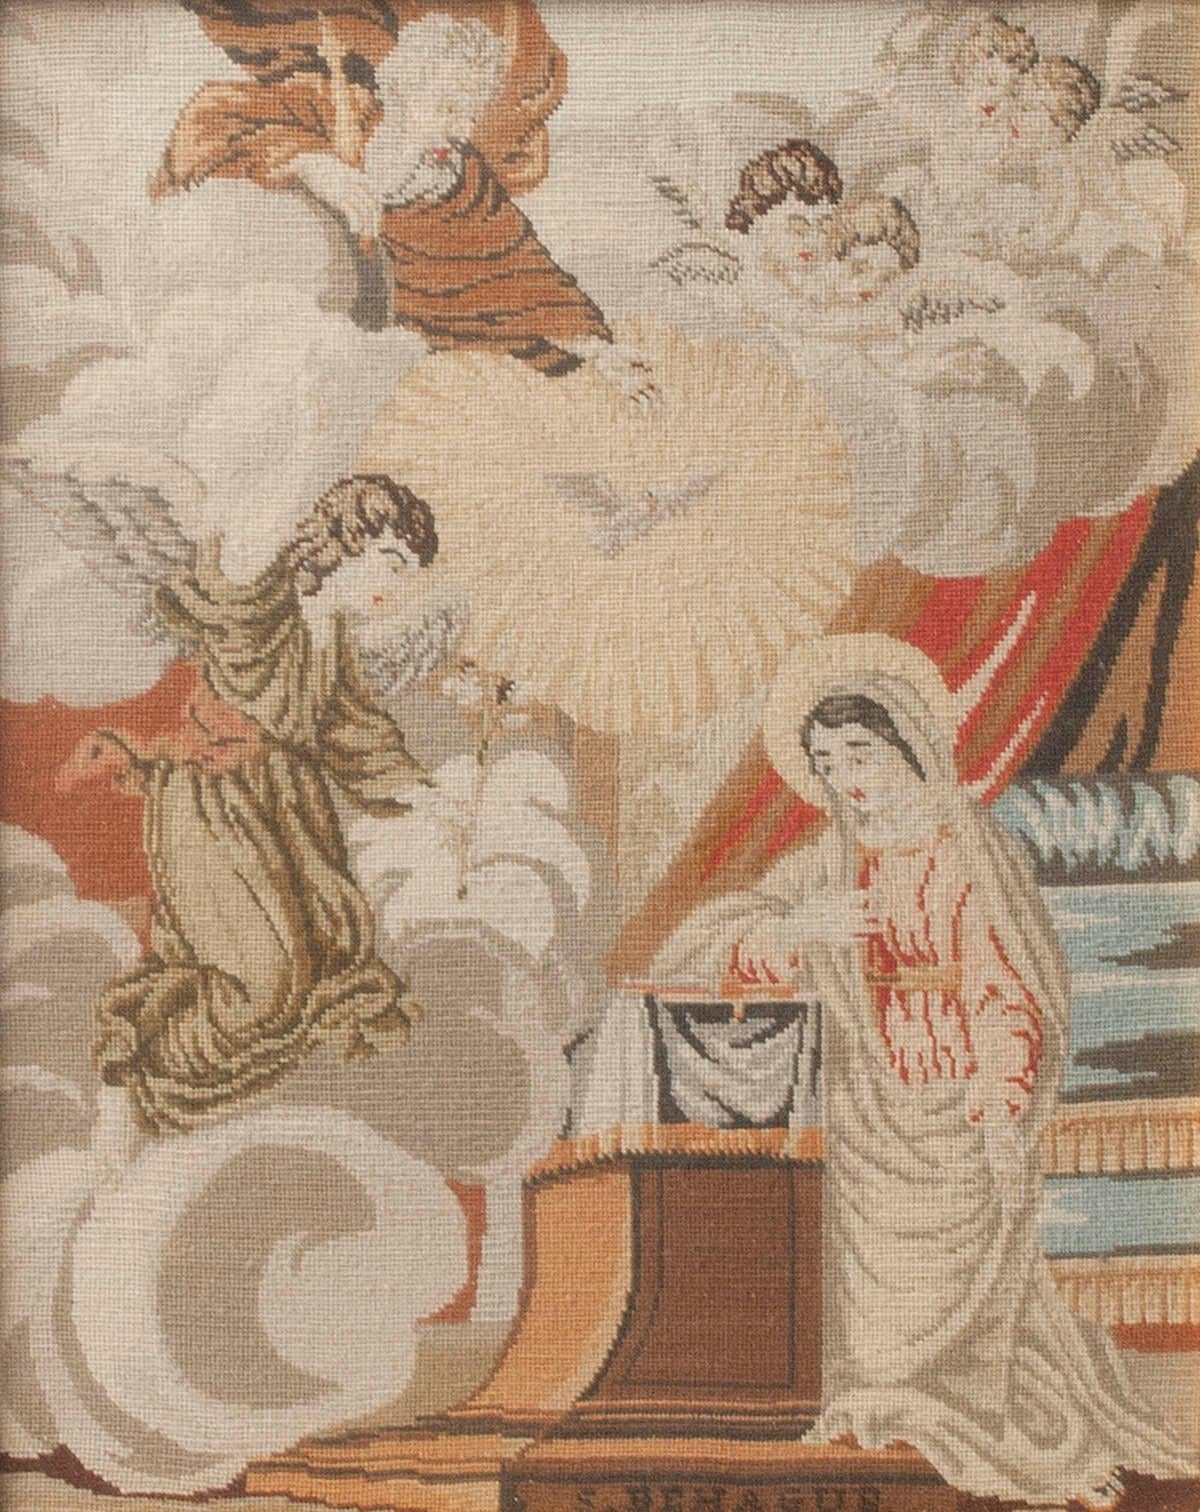 Charles X Annunciation to the Blessed Virgin Mary Needlepoint Tapestry, France, 1850-1870